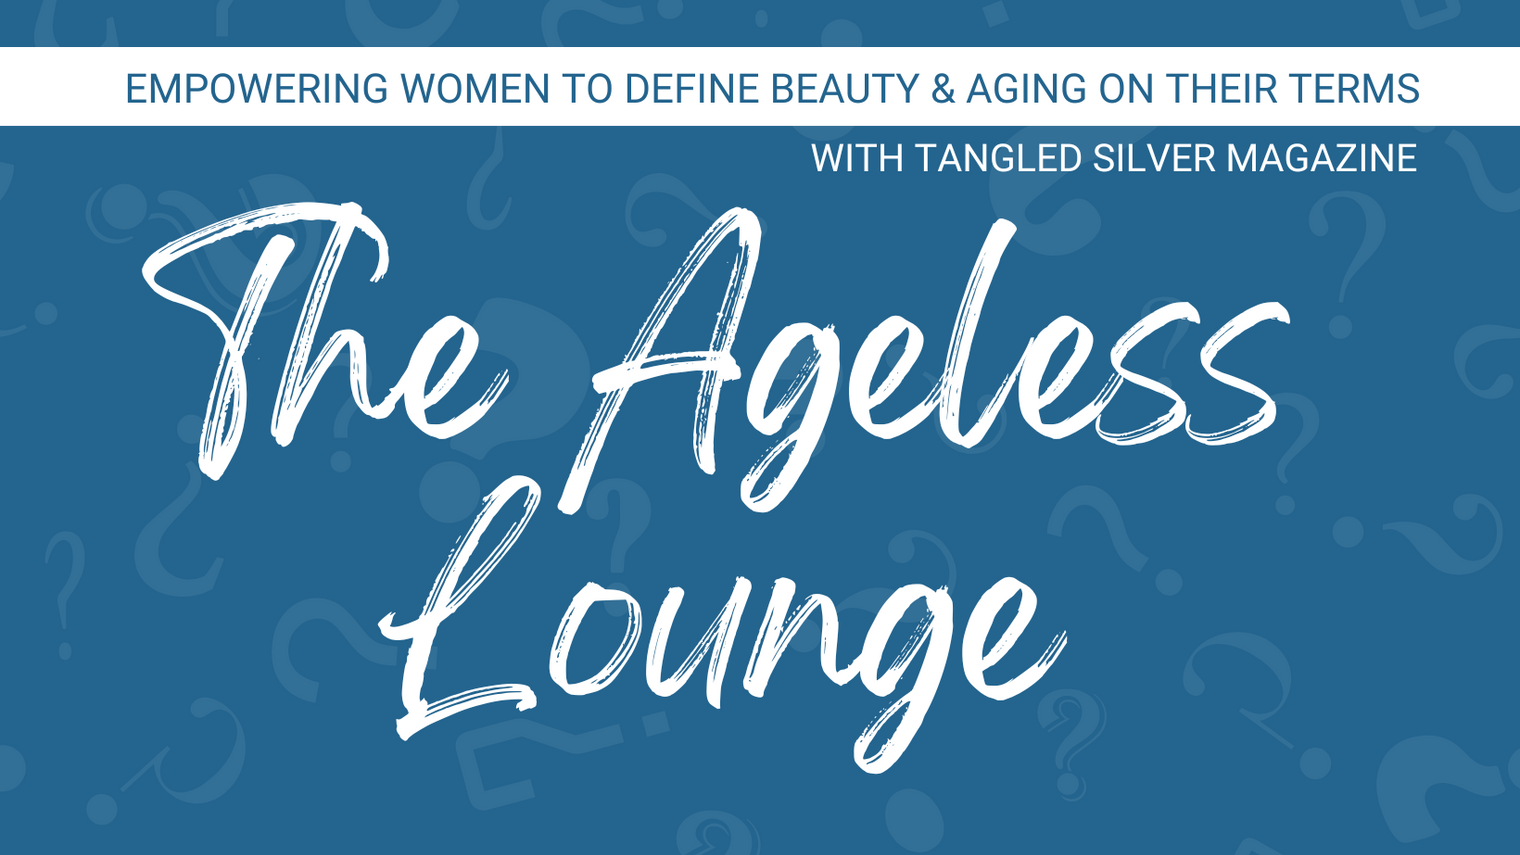 The Ageless Lounge